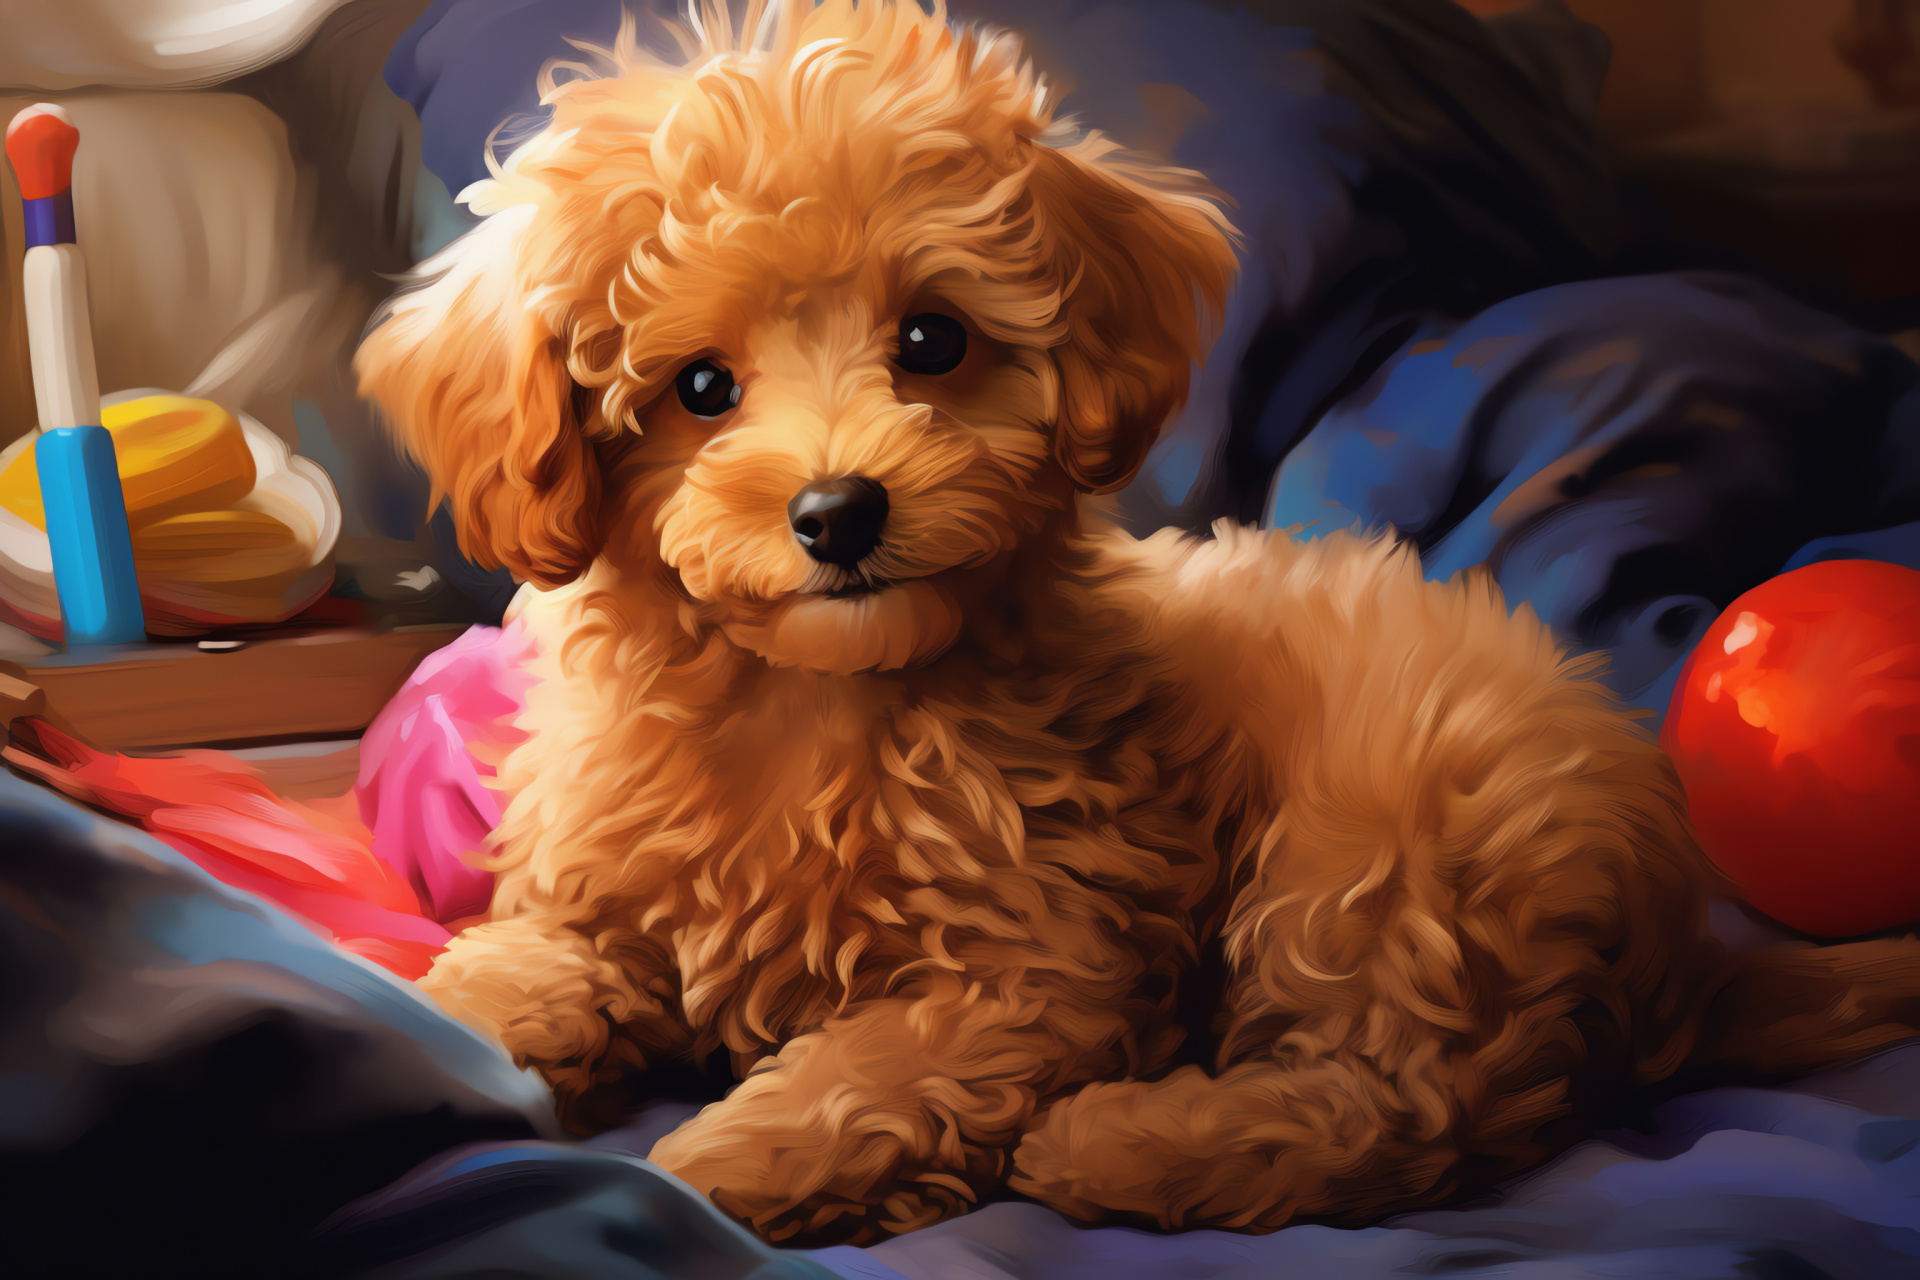 Lively pup, Toy Poodle breed, Young playful nature, Canine indoor activity, Pup at play, HD Desktop Image